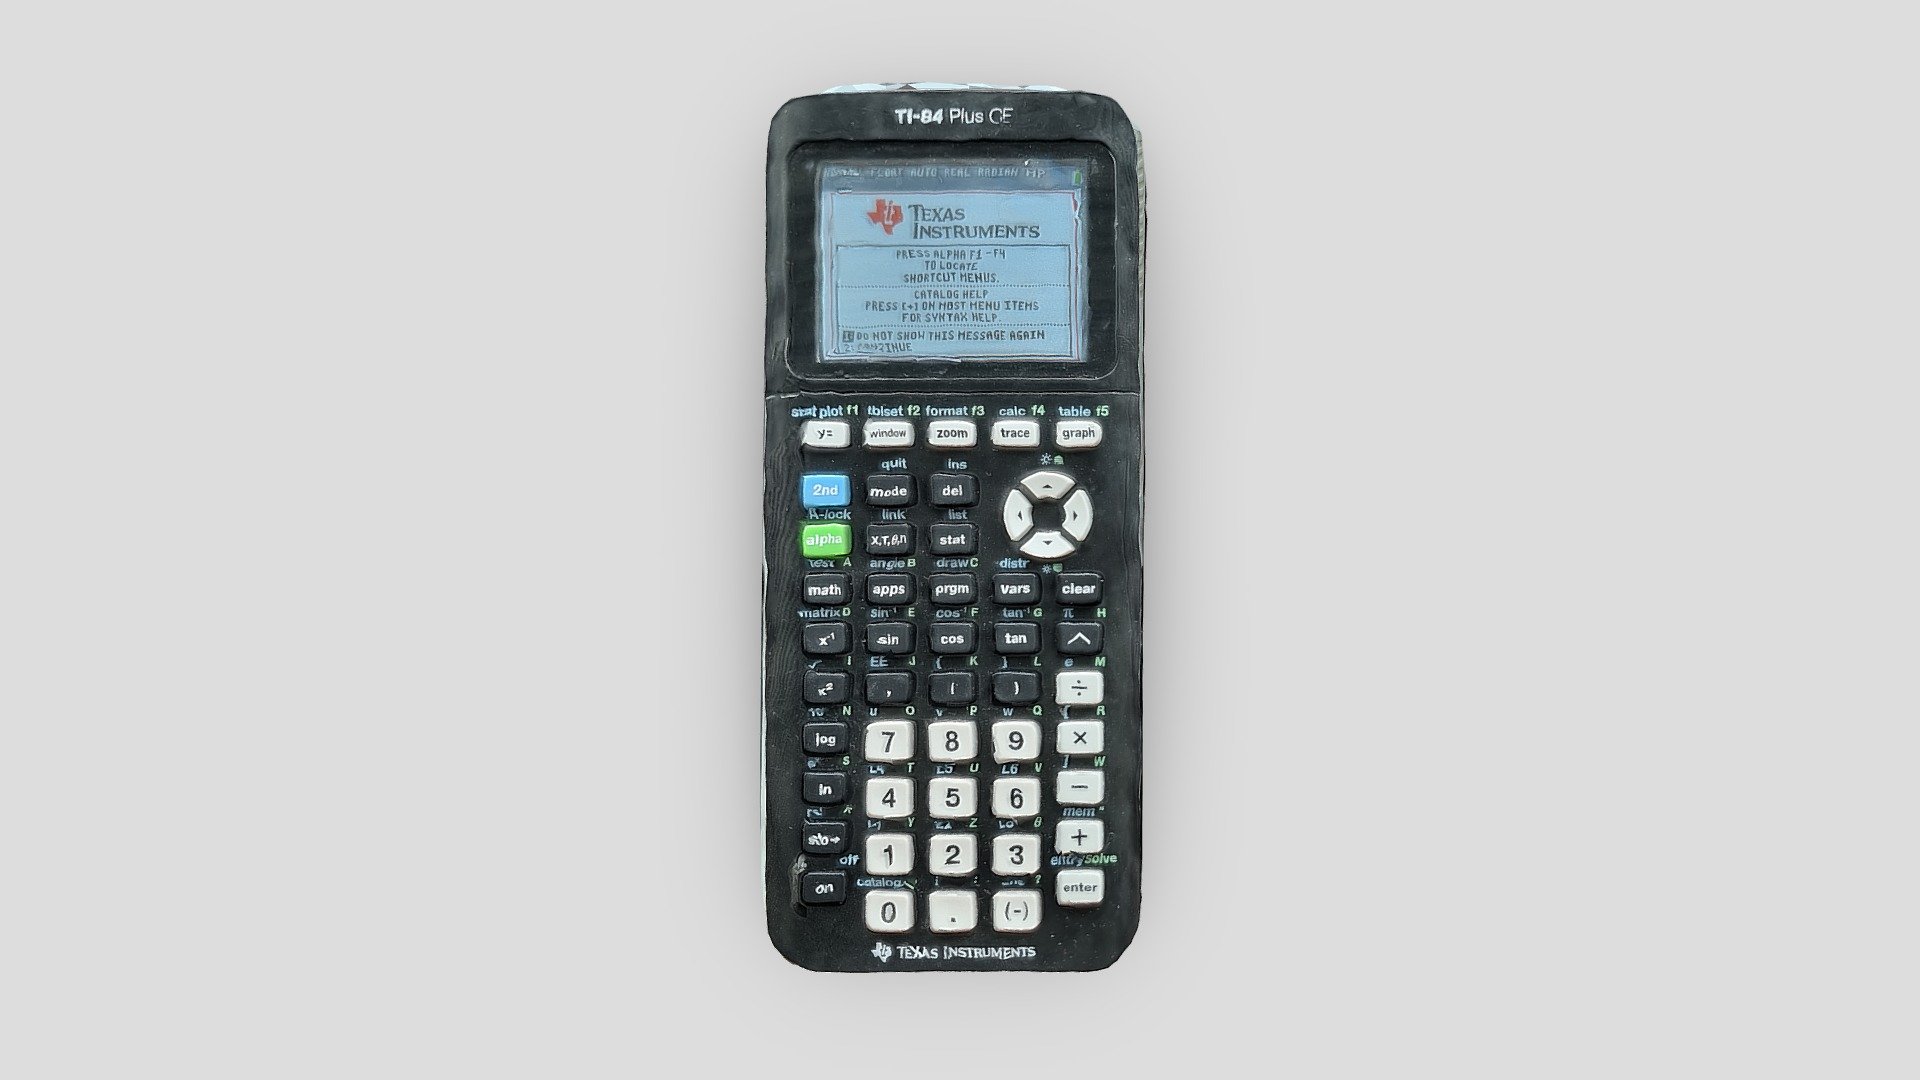 Photogrammetry of Texas Instrument TI-84 Plus CE Graphing Calculator 

Data collection using Samsung Galaxy S21 FE
Processed using 3DF Free and merged using Blender - Texas Instrument TI-84 Plus CE Calculator - Download Free 3D model by JFN (@db4) 3d model